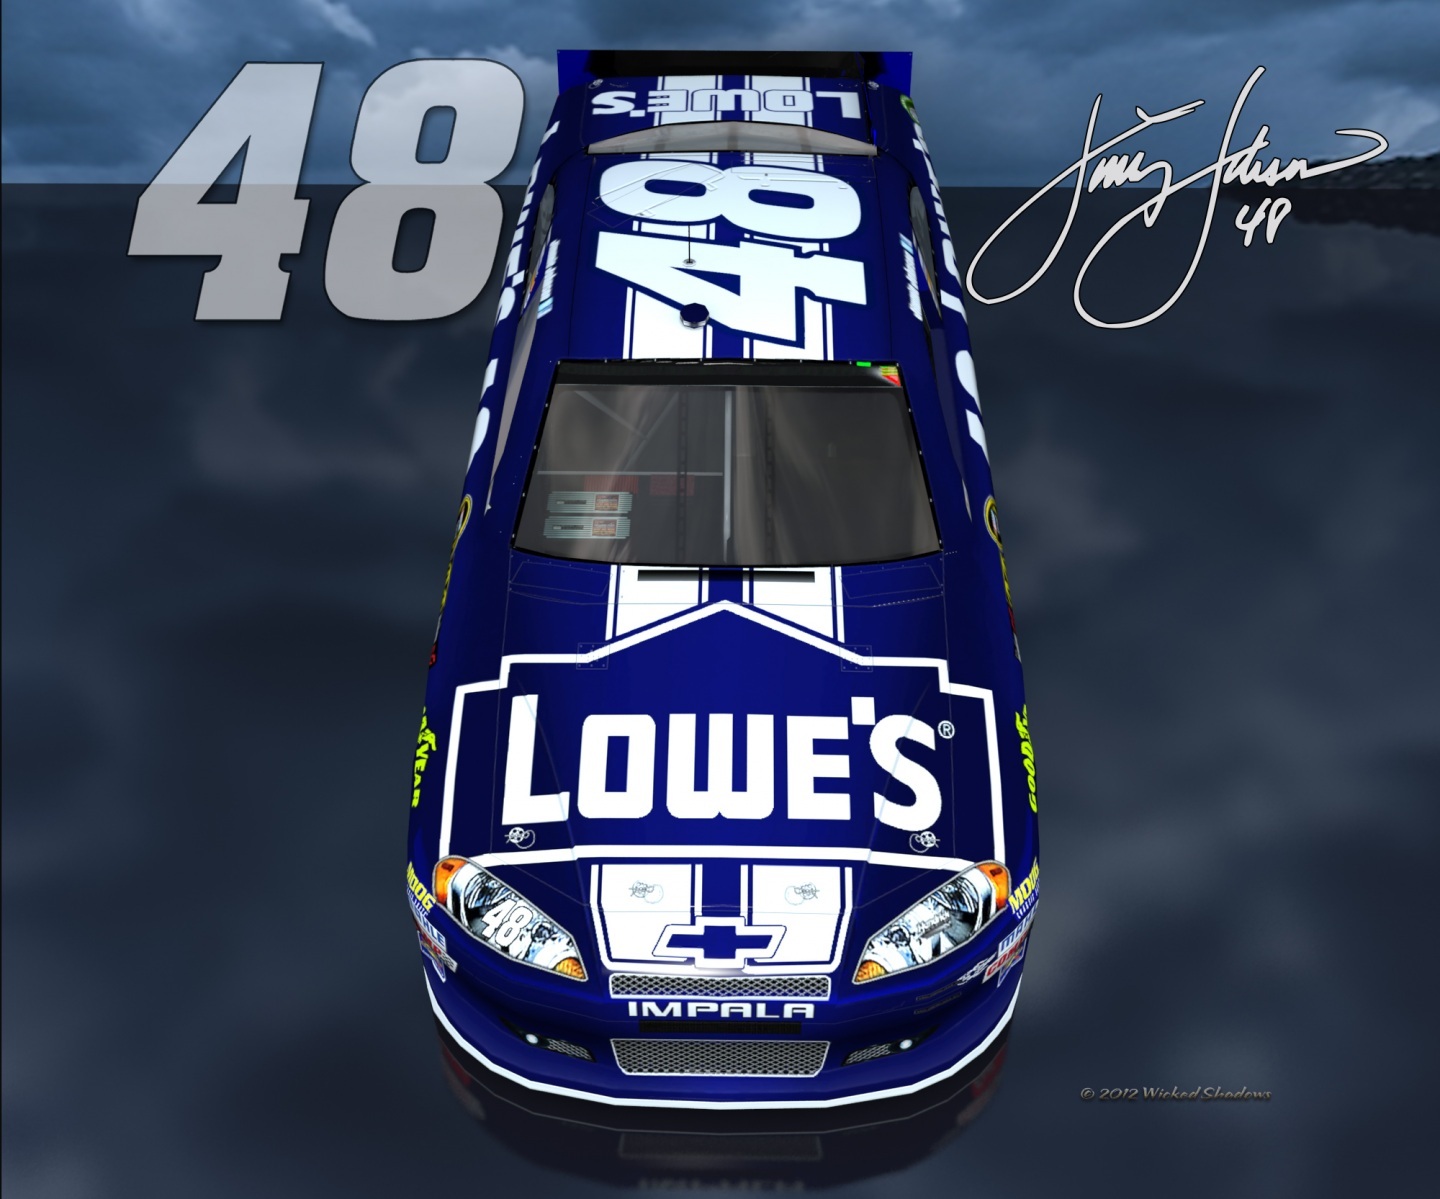 Free Download Jimmie Johnson Android Blue Lowes Brighter Outdoor Wallpaper Photo 1440x1199 For Your Desktop Mobile Tablet Explore 35 Jimmie Johnson 17 Wallpaper Jimmie Johnson 17 Wallpaper Jimmie Johnson Wallpapers Jimmie Johnson Wallpaper